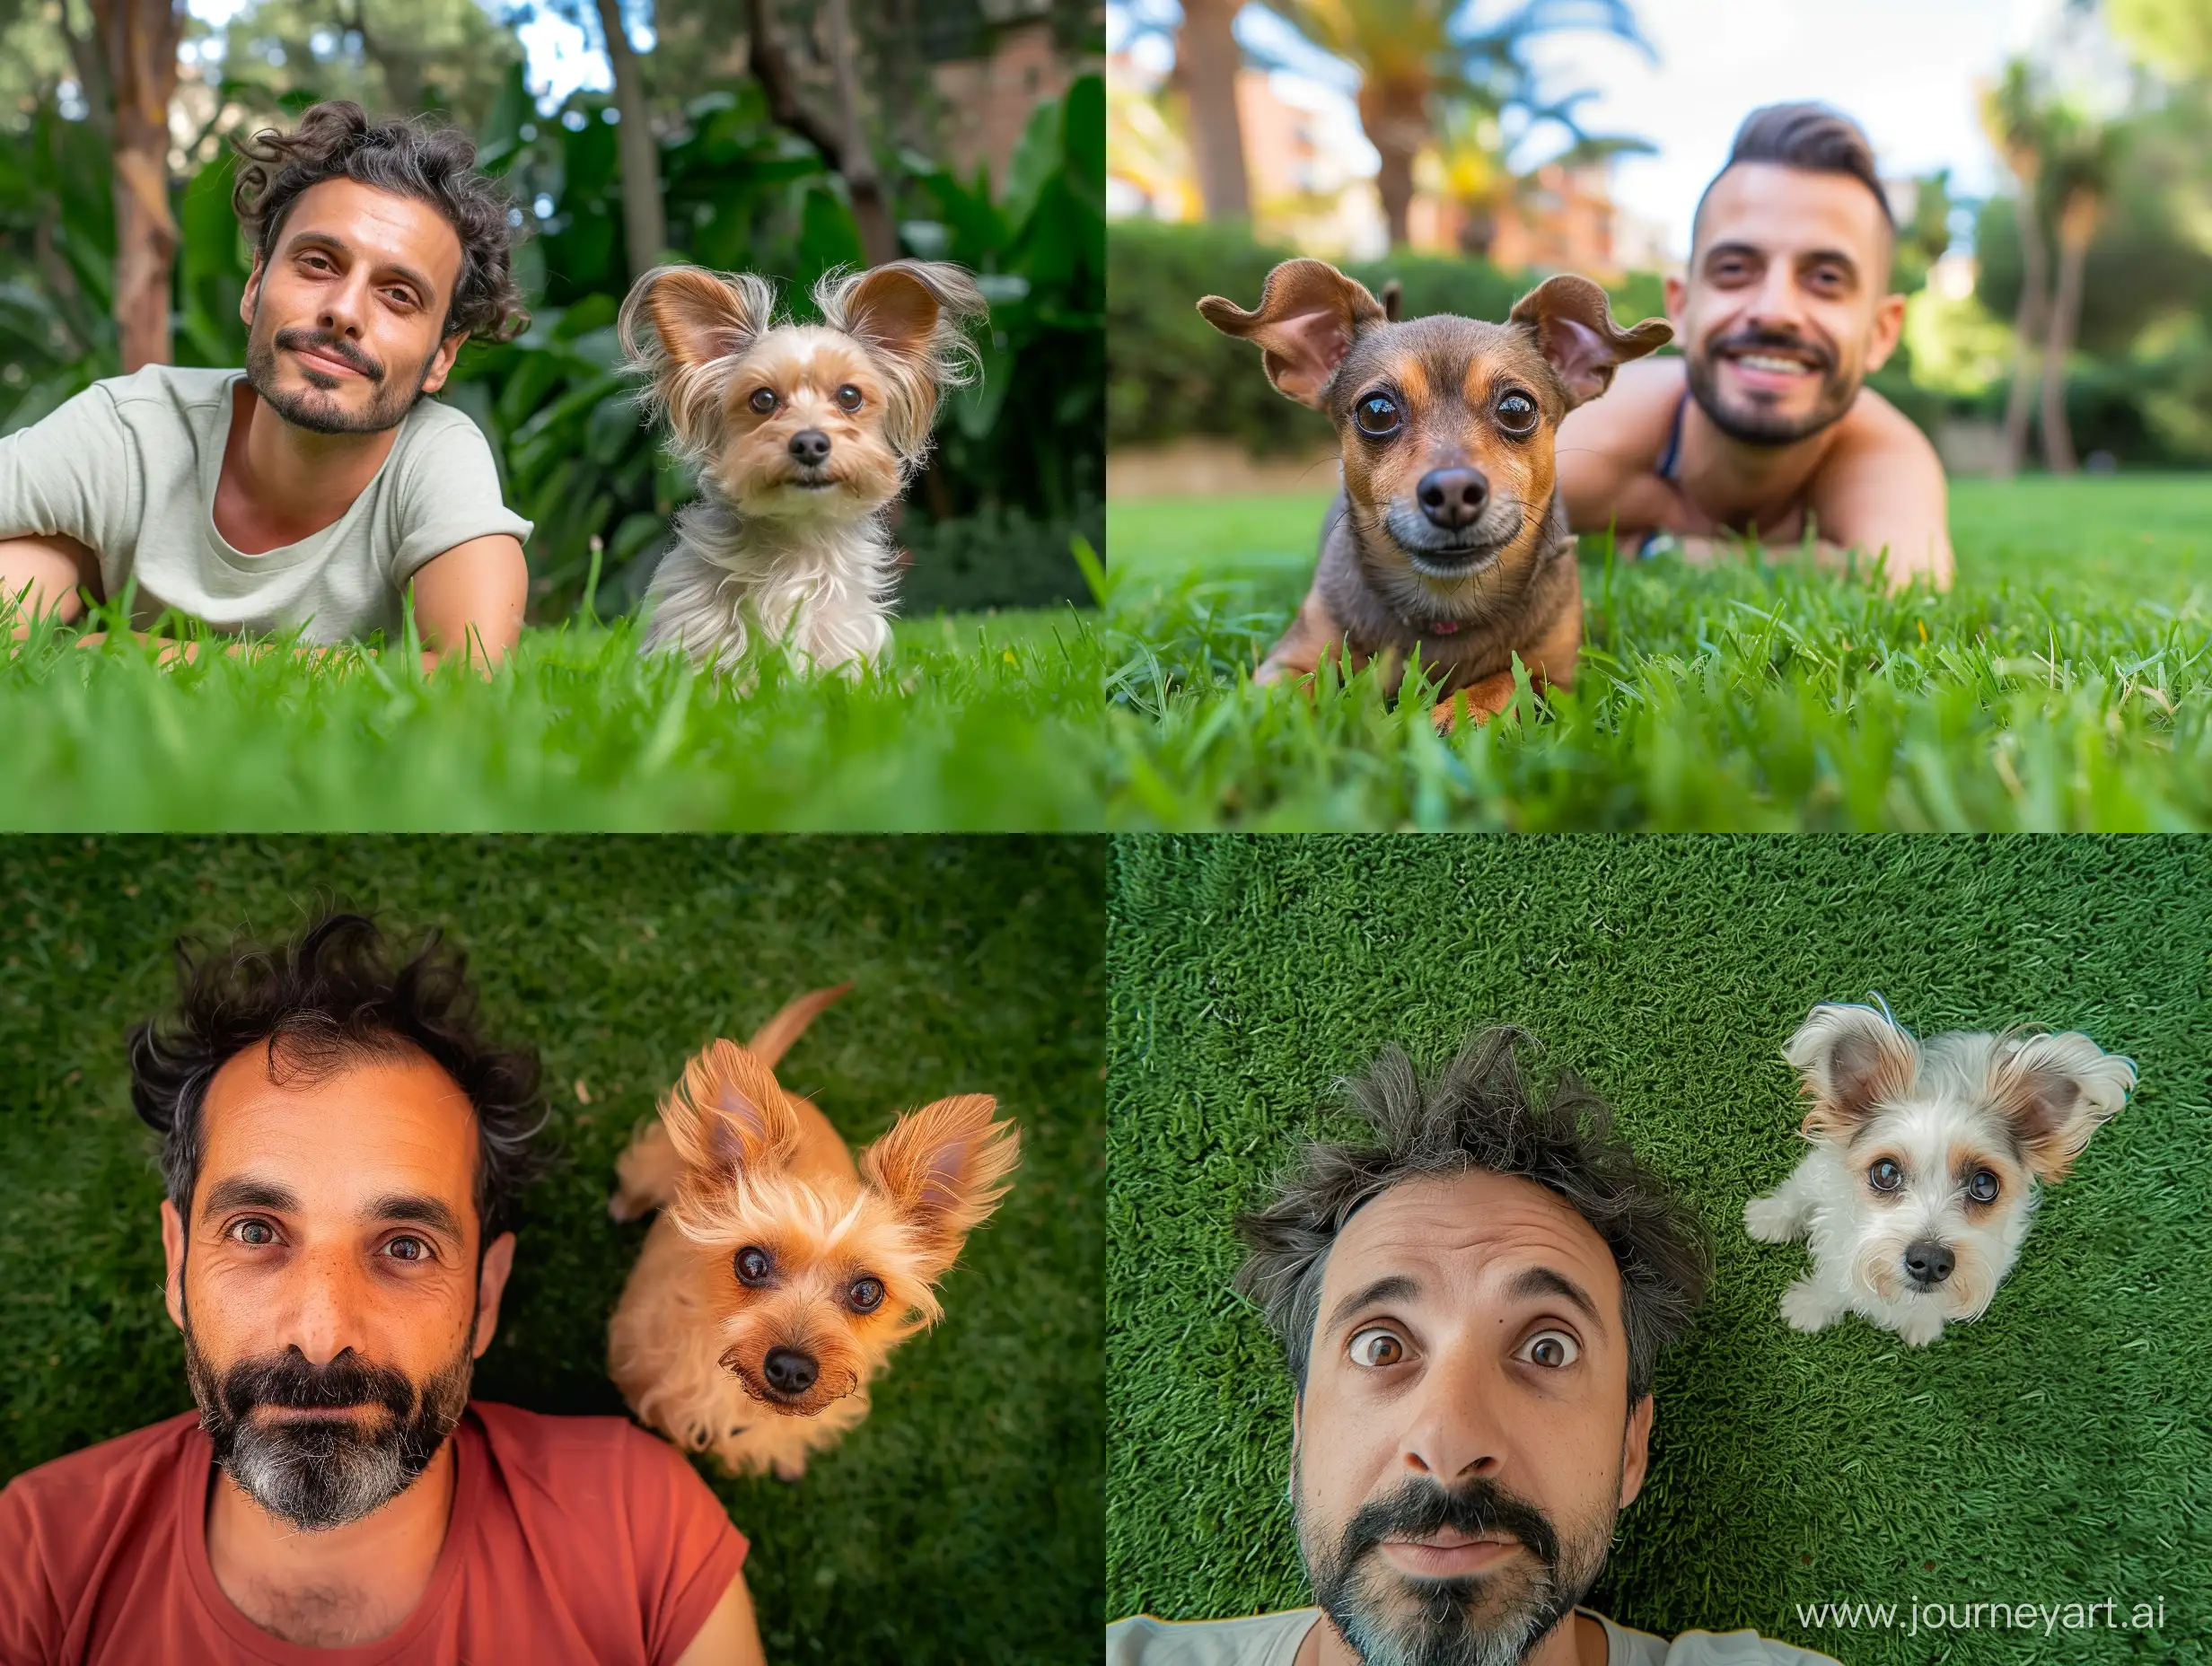 Spanish-Man-Enjoying-Leisure-Time-with-His-Adorable-Dog-on-Vibrant-Green-Lawn-in-Barcelona